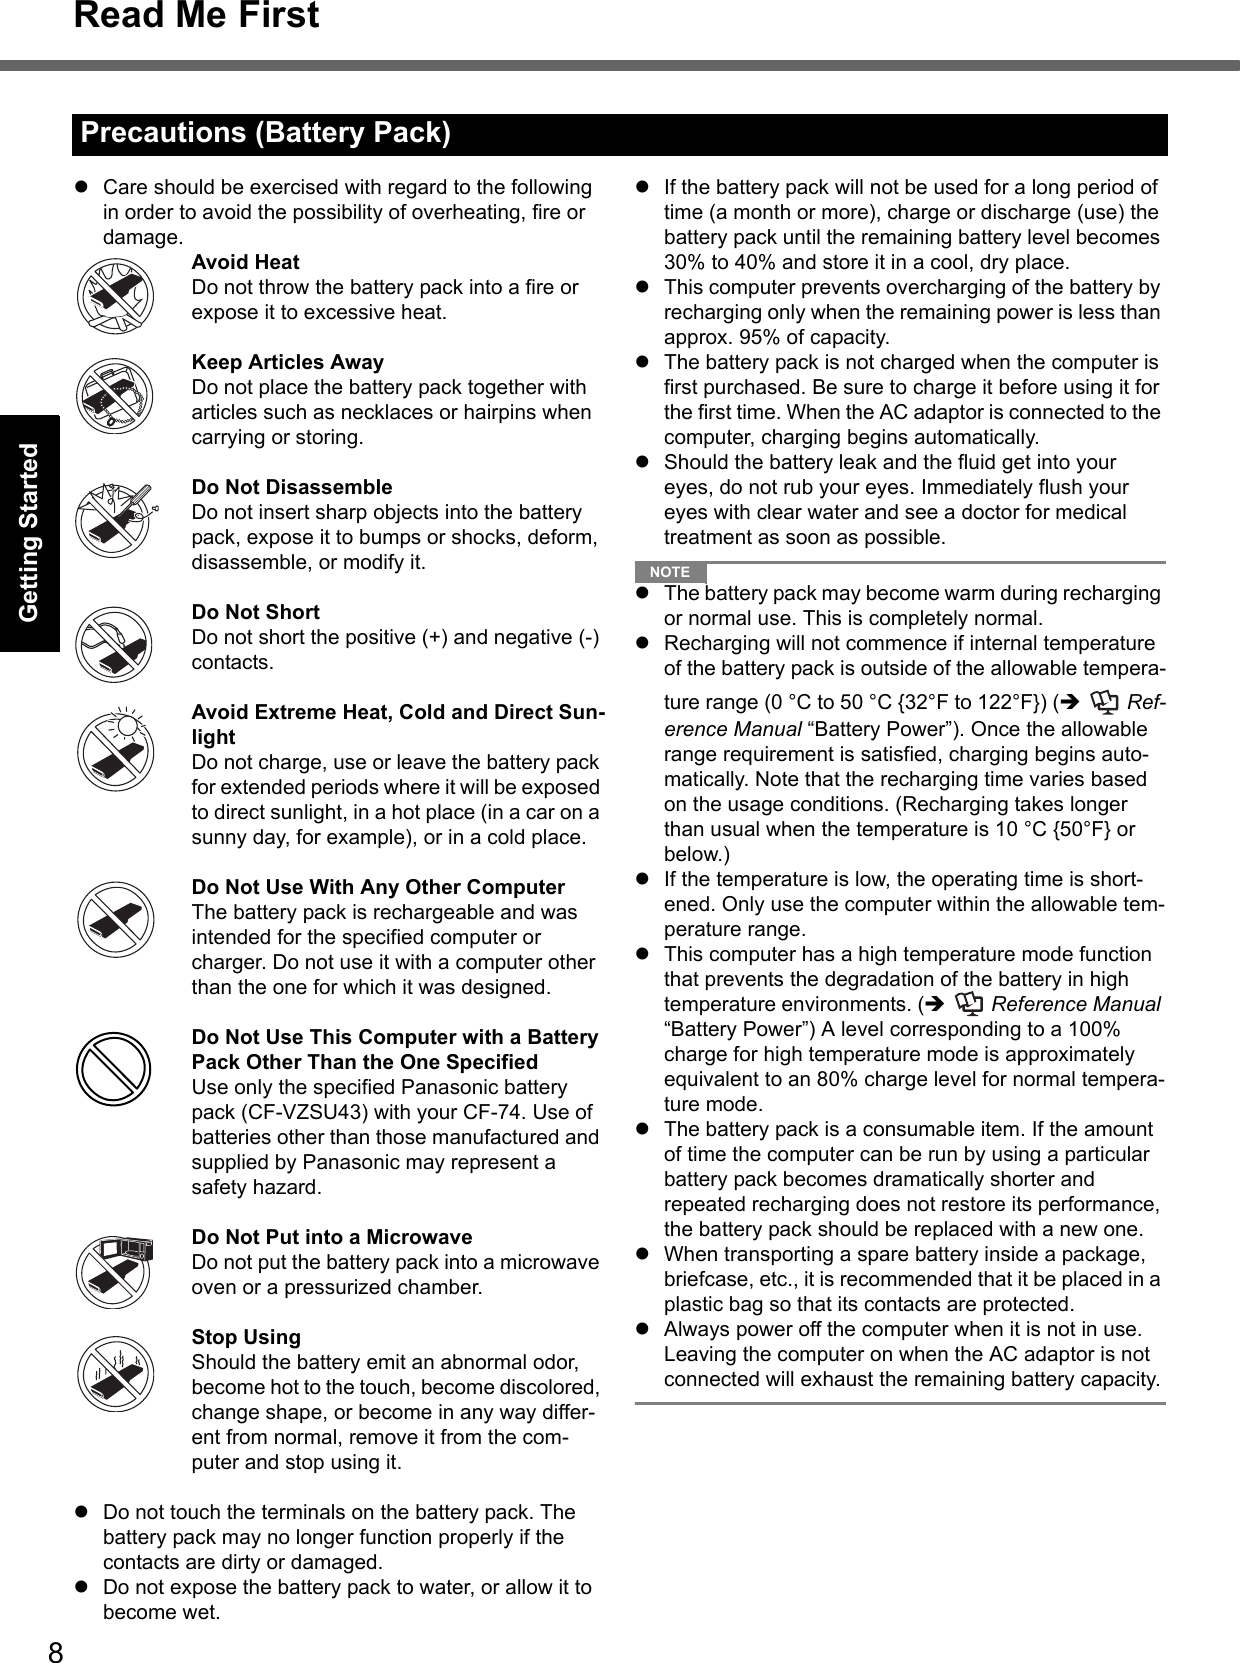 8Read Me FirstGetting StartedUseful InformationTroubleshootingAppendixzCare should be exercised with regard to the following in order to avoid the possibility of overheating, fire or damage.Avoid HeatDo not throw the battery pack into a fire or expose it to excessive heat.Keep Articles AwayDo not place the battery pack together with articles such as necklaces or hairpins when carrying or storing.Do Not DisassembleDo not insert sharp objects into the battery pack, expose it to bumps or shocks, deform, disassemble, or modify it.Do Not ShortDo not short the positive (+) and negative (-) contacts.Avoid Extreme Heat, Cold and Direct Sun-lightDo not charge, use or leave the battery pack for extended periods where it will be exposed to direct sunlight, in a hot place (in a car on a sunny day, for example), or in a cold place.Do Not Use With Any Other ComputerThe battery pack is rechargeable and was intended for the specified computer or charger. Do not use it with a computer other than the one for which it was designed.Do Not Use This Computer with a Battery Pack Other Than the One SpecifiedUse only the specified Panasonic battery pack (CF-VZSU43) with your CF-74. Use of batteries other than those manufactured and supplied by Panasonic may represent a safety hazard.Do Not Put into a MicrowaveDo not put the battery pack into a microwave oven or a pressurized chamber.Stop UsingShould the battery emit an abnormal odor, become hot to the touch, become discolored, change shape, or become in any way differ-ent from normal, remove it from the com-puter and stop using it.zDo not touch the terminals on the battery pack. The battery pack may no longer function properly if the contacts are dirty or damaged.zDo not expose the battery pack to water, or allow it to become wet.zIf the battery pack will not be used for a long period of time (a month or more), charge or discharge (use) the battery pack until the remaining battery level becomes 30% to 40% and store it in a cool, dry place.zThis computer prevents overcharging of the battery by recharging only when the remaining power is less than approx. 95% of capacity.zThe battery pack is not charged when the computer is first purchased. Be sure to charge it before using it for the first time. When the AC adaptor is connected to the computer, charging begins automatically.zShould the battery leak and the fluid get into your eyes, do not rub your eyes. Immediately flush your eyes with clear water and see a doctor for medical treatment as soon as possible.NOTEzThe battery pack may become warm during recharging or normal use. This is completely normal.zRecharging will not commence if internal temperature of the battery pack is outside of the allowable tempera-ture range (0 °C to 50 °C {32°F to 122°F}) (Î  Ref-erence Manual “Battery Power”). Once the allowable range requirement is satisfied, charging begins auto-matically. Note that the recharging time varies based on the usage conditions. (Recharging takes longer than usual when the temperature is 10 °C {50°F} or below.)zIf the temperature is low, the operating time is short-ened. Only use the computer within the allowable tem-perature range.zThis computer has a high temperature mode function that prevents the degradation of the battery in high temperature environments. (Î  Reference Manual “Battery Power”) A level corresponding to a 100% charge for high temperature mode is approximately equivalent to an 80% charge level for normal tempera-ture mode.zThe battery pack is a consumable item. If the amount of time the computer can be run by using a particular battery pack becomes dramatically shorter and repeated recharging does not restore its performance, the battery pack should be replaced with a new one.zWhen transporting a spare battery inside a package, briefcase, etc., it is recommended that it be placed in a plastic bag so that its contacts are protected.zAlways power off the computer when it is not in use. Leaving the computer on when the AC adaptor is not connected will exhaust the remaining battery capacity.Precautions (Battery Pack)